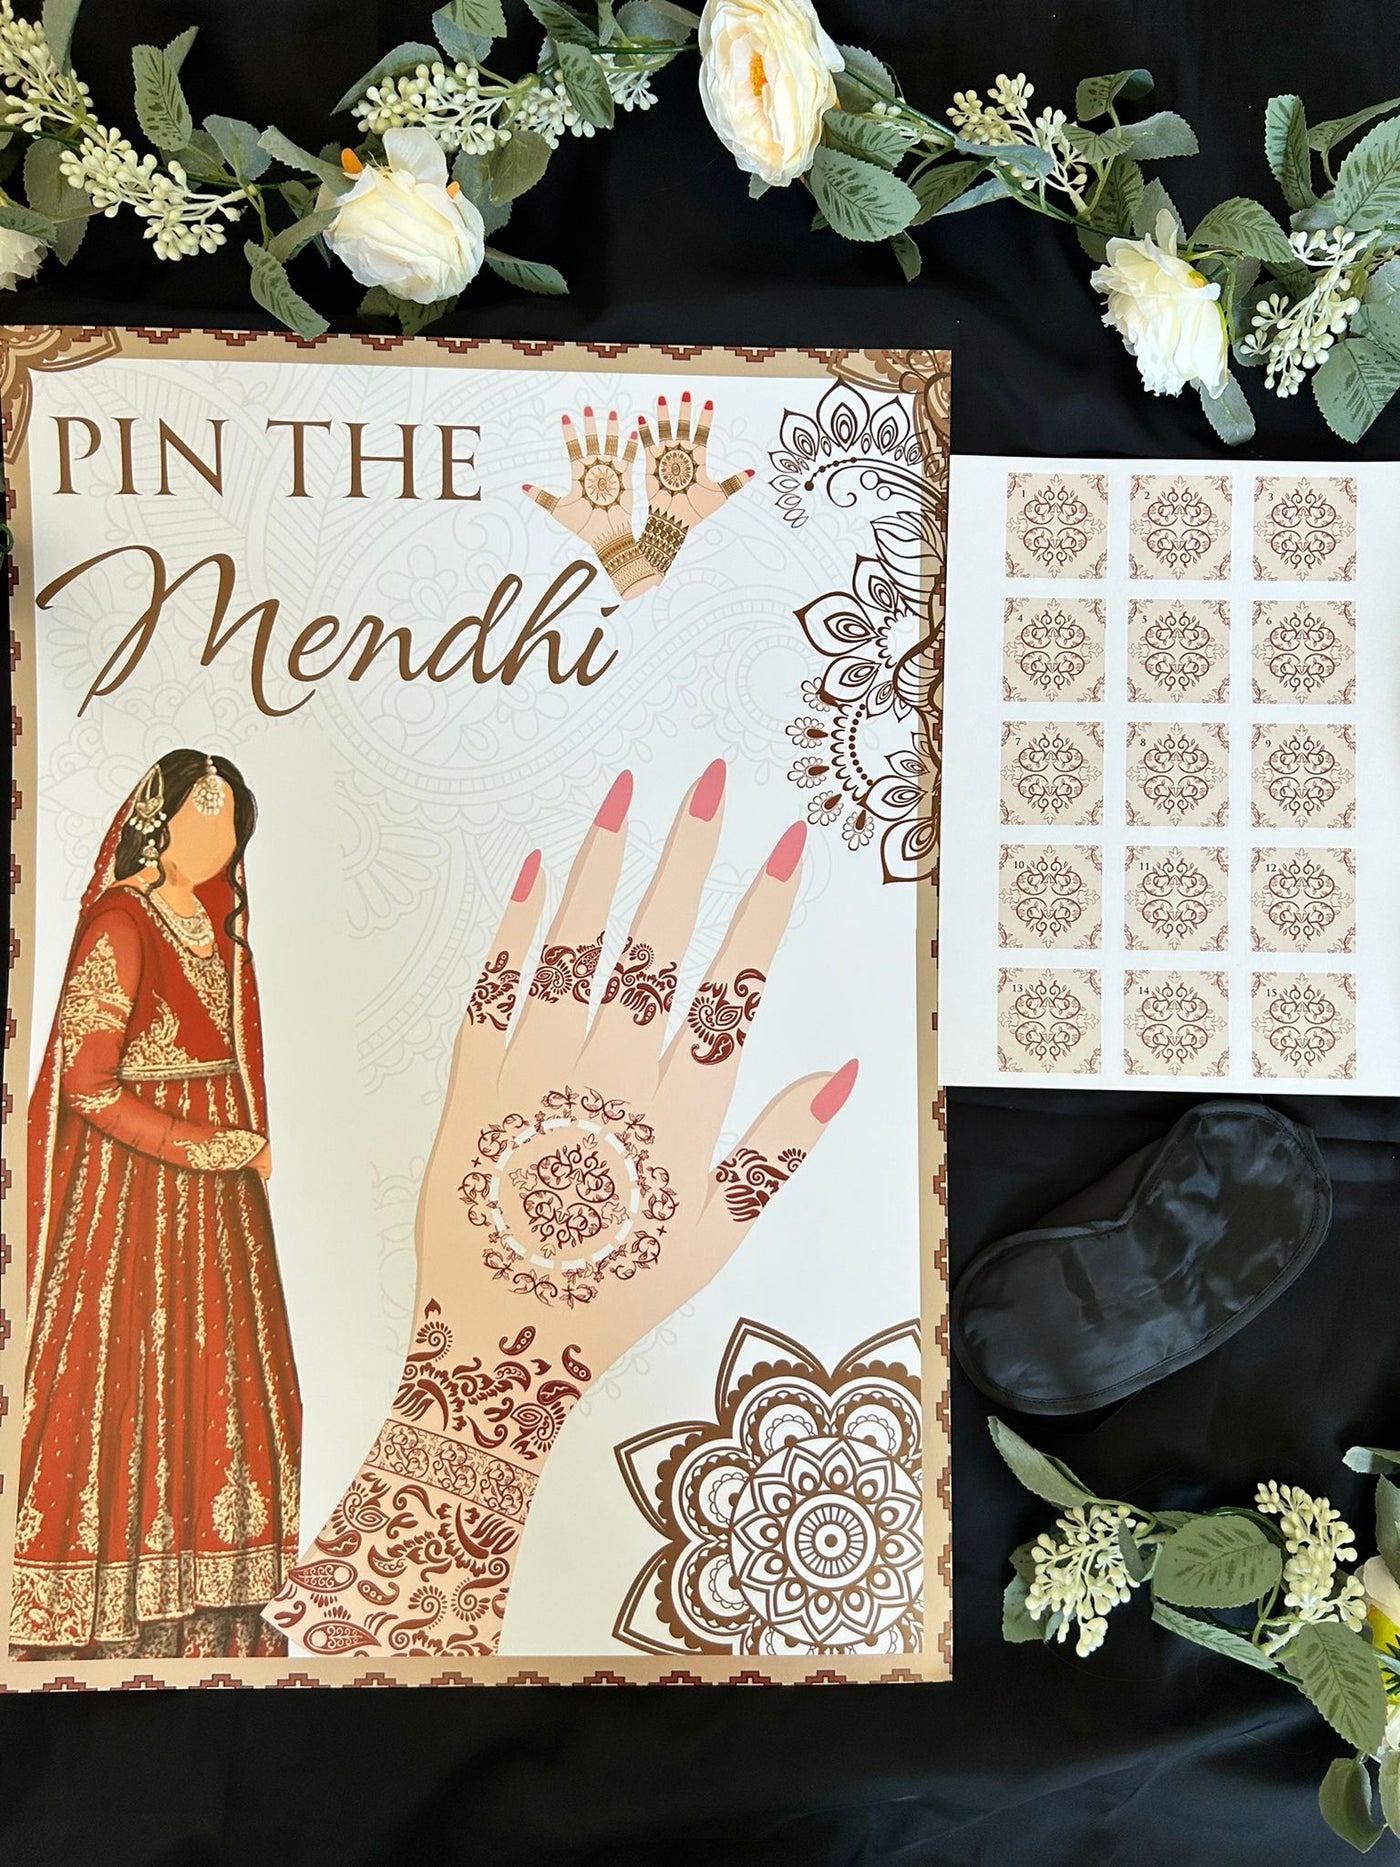 Pin the Mendhi- Asian Event Game